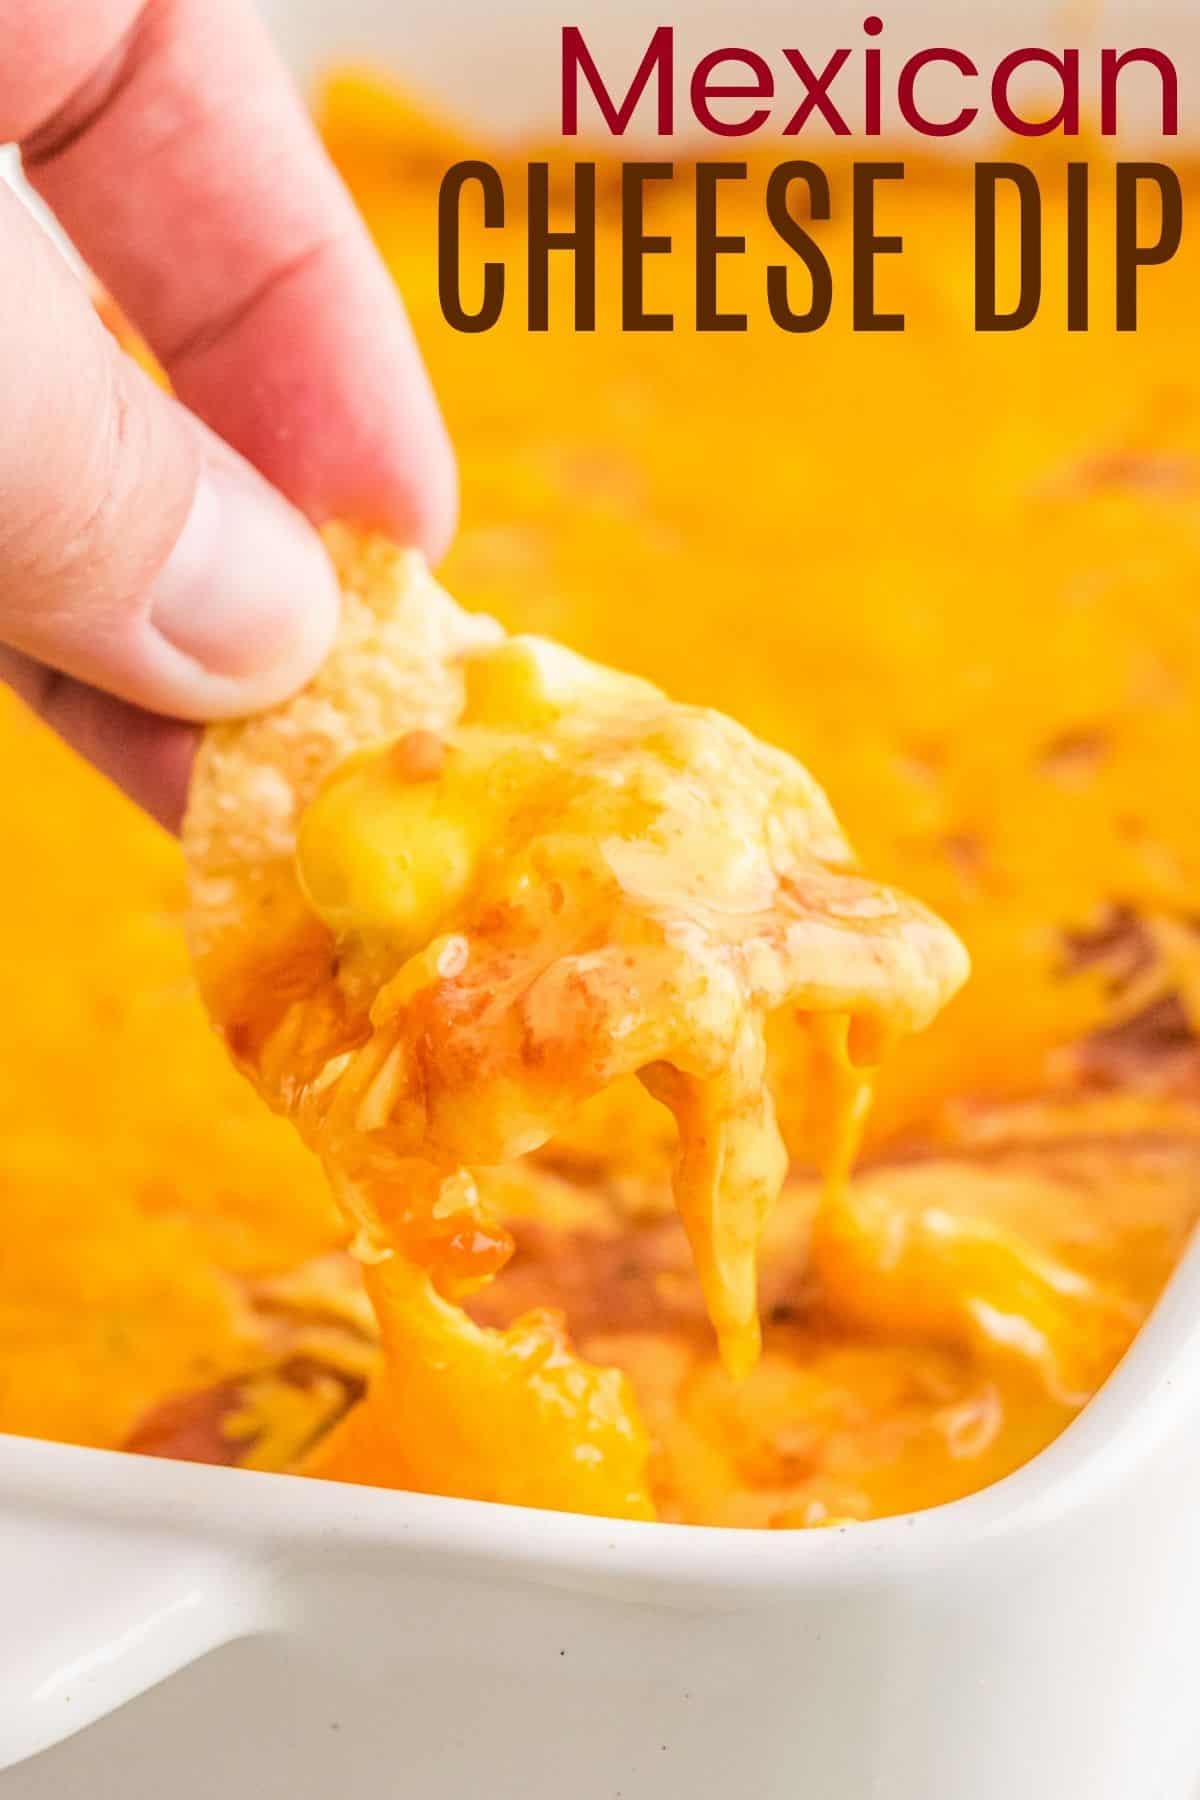 Cheesy-Mexican-Cheese-Dip-Appetizer-2-title.jpg